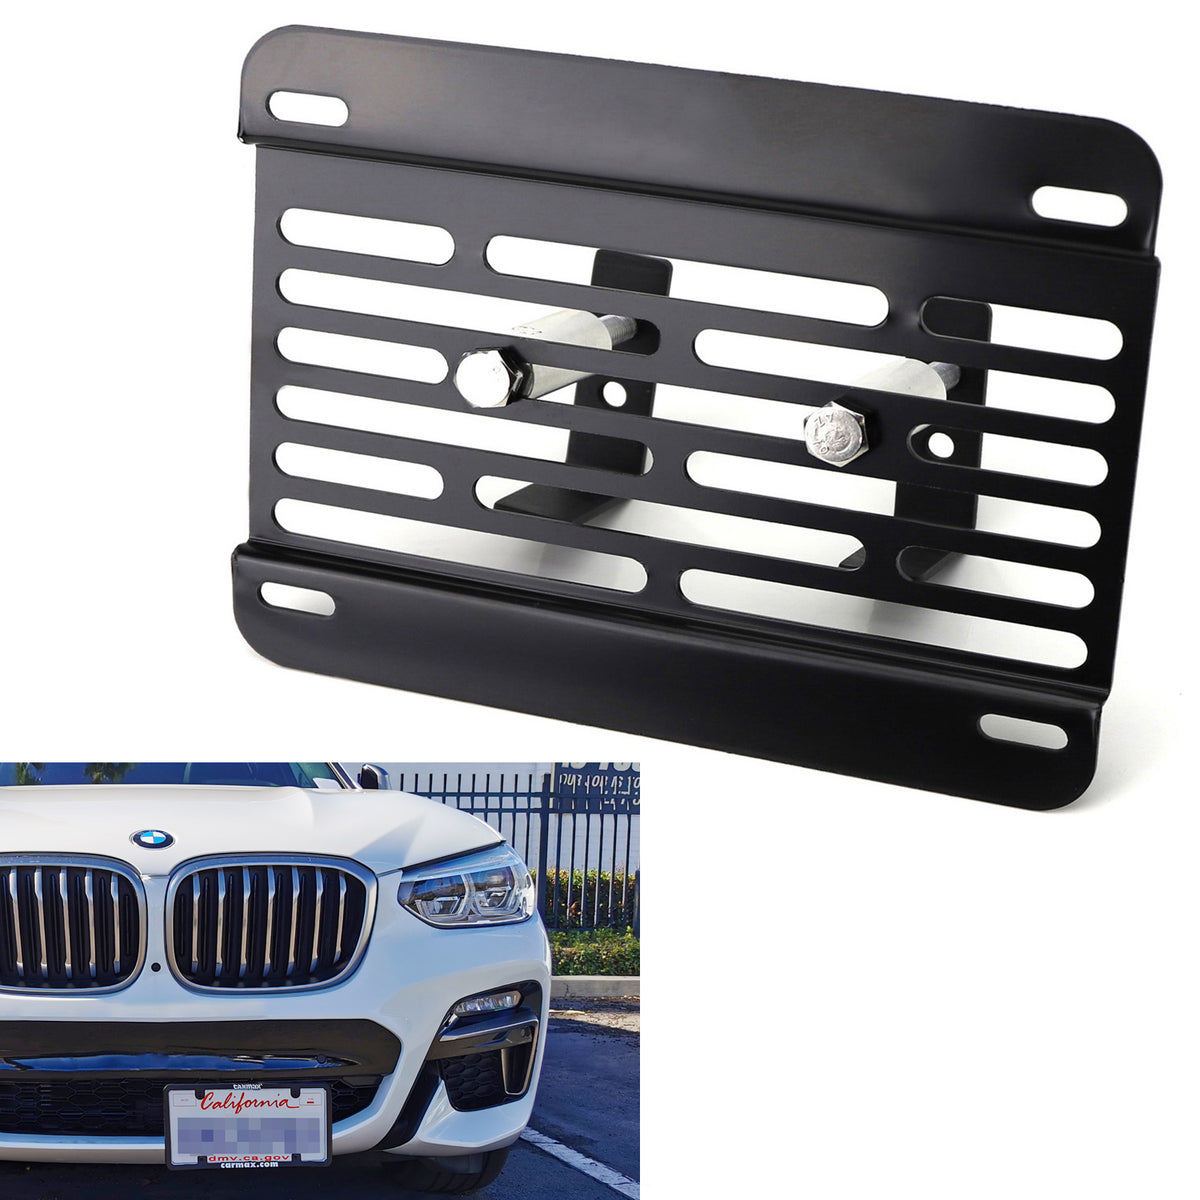 BMW X3 X4 No Drill Front Grille Mesh Mount License Plate Relocator